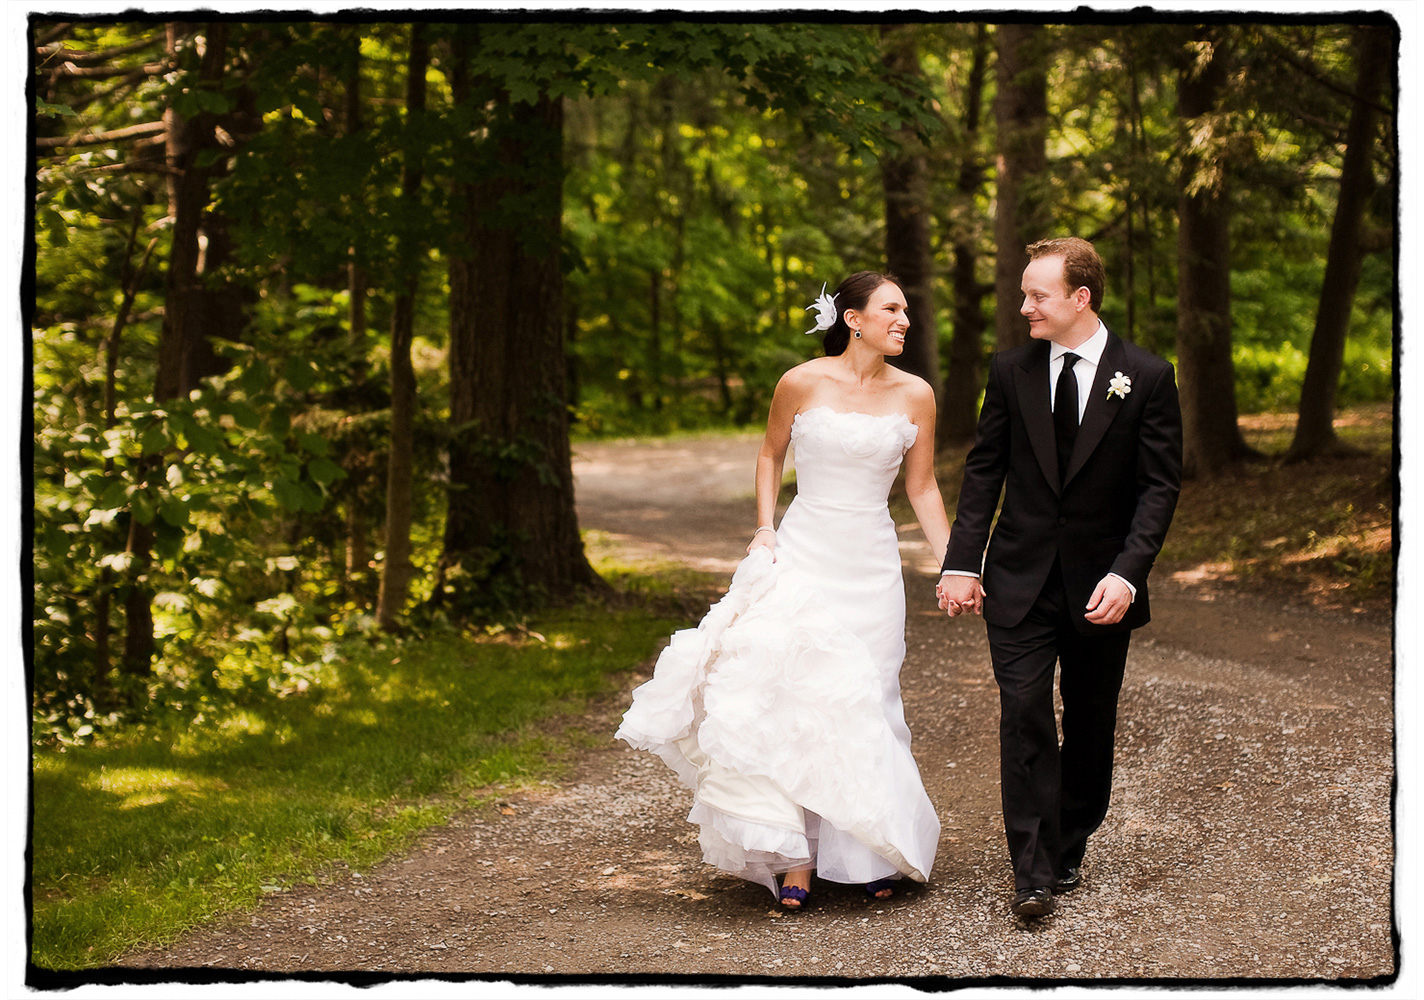 The grounds at Buttermilk Falls Inn are an incredible spot for a romantic stroll.  I loved how Michele's dress flounced as she walked with her husband-to-be.